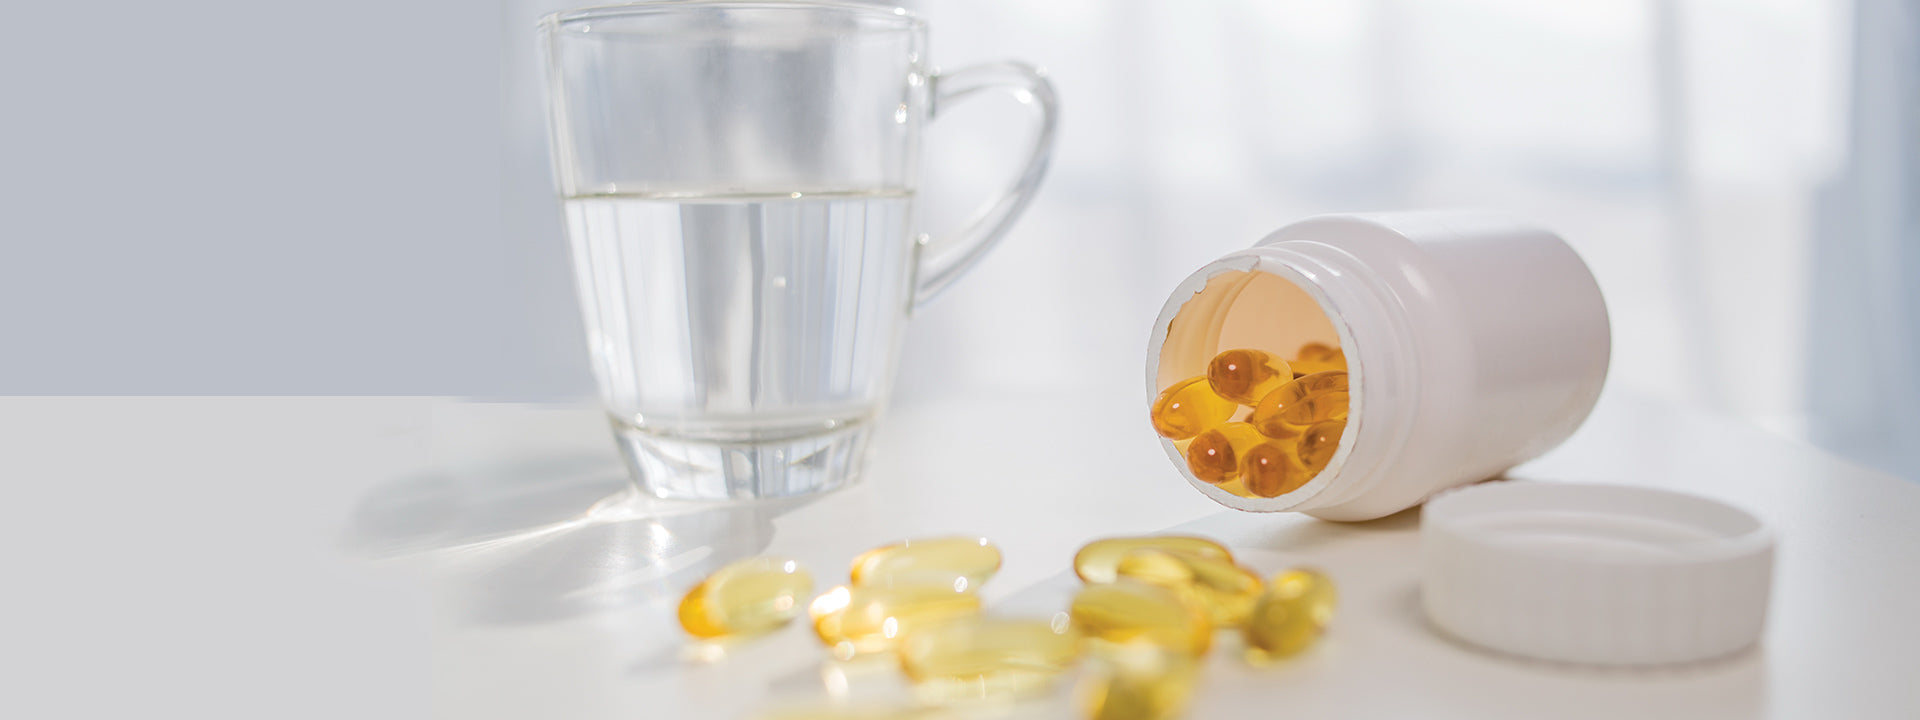 Study calls into Question the quality and EPA/DHA content of many Fish Oil Supplements sold in New Zealand and Australia